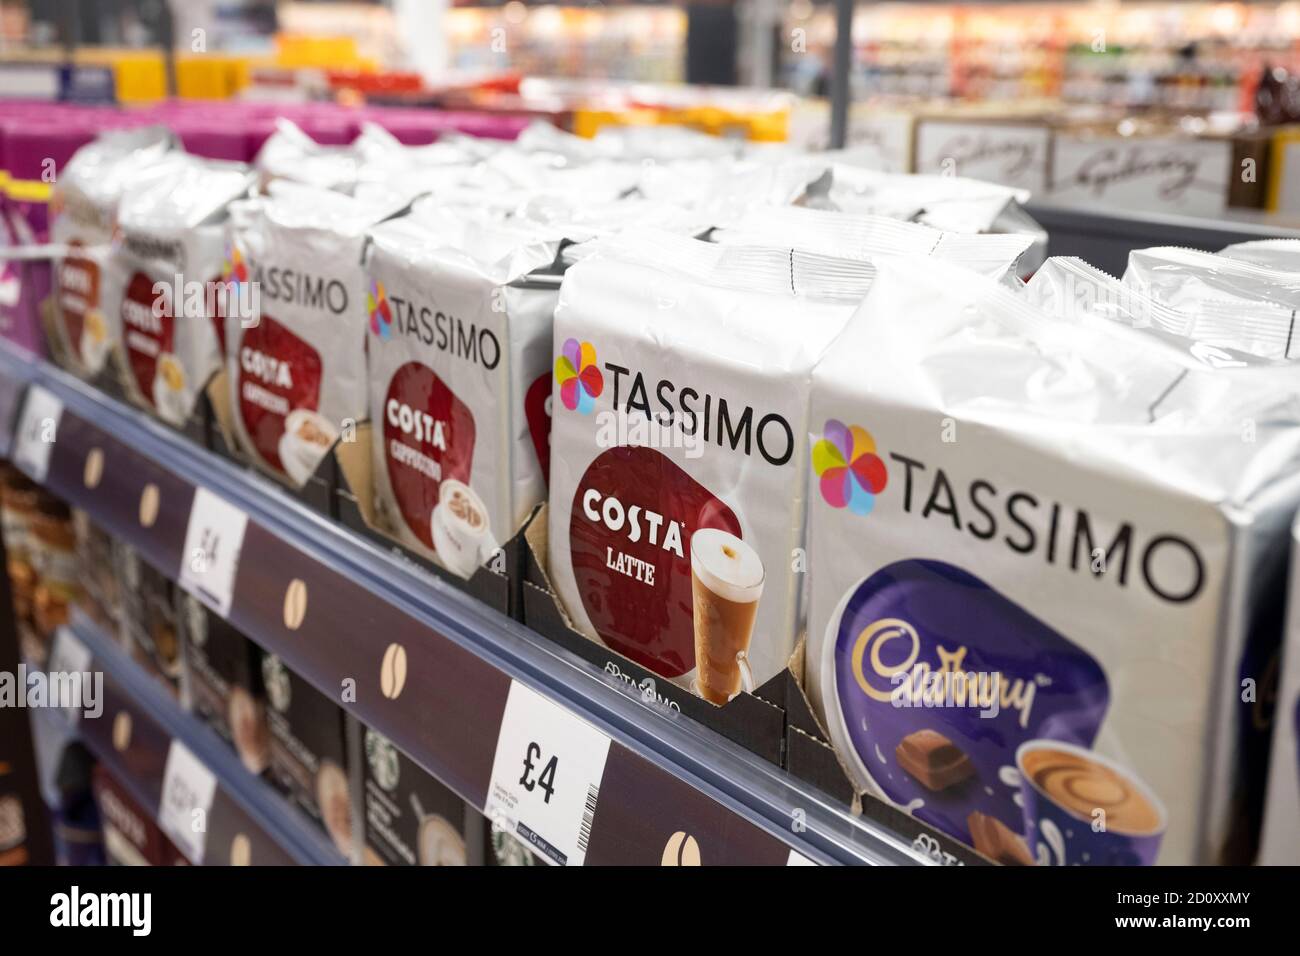 Packets of Tassimo coffee capsules on sale on a shelf in a supermarket in Cardiff, Wales, United Kingdom. Stock Photo